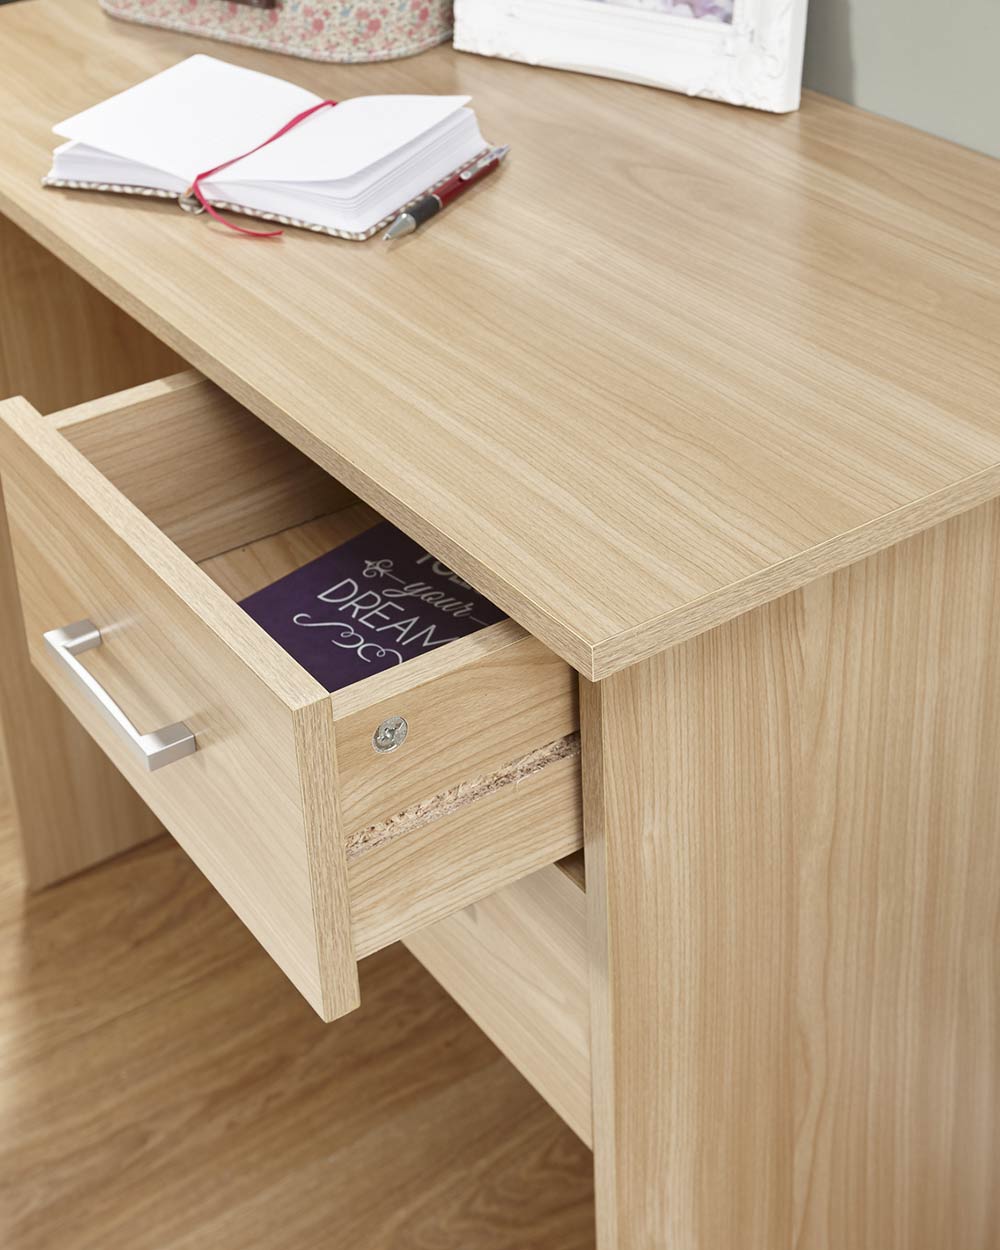 panama oak effect home office desk in a lifestyle image close up of the drawer